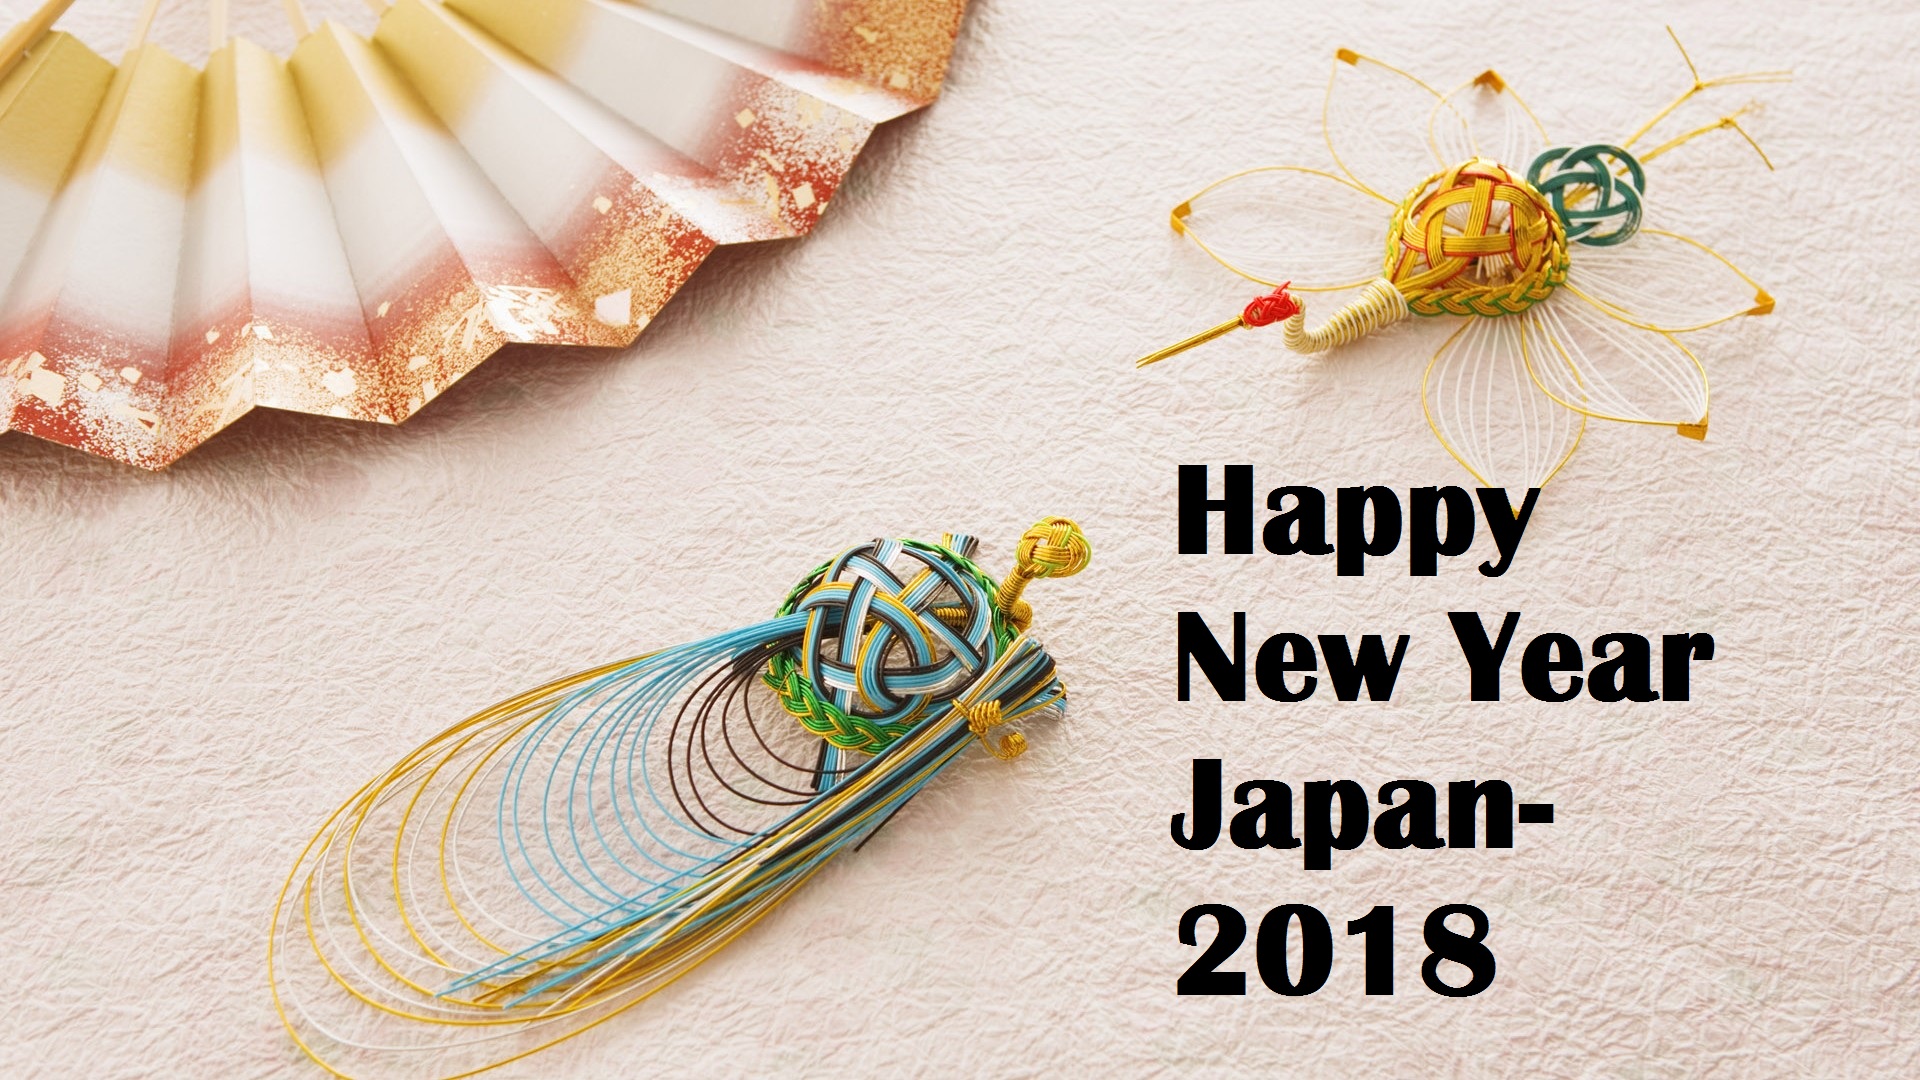 New-Years-Japanese-Cultural-Hd-wallpapers-Images